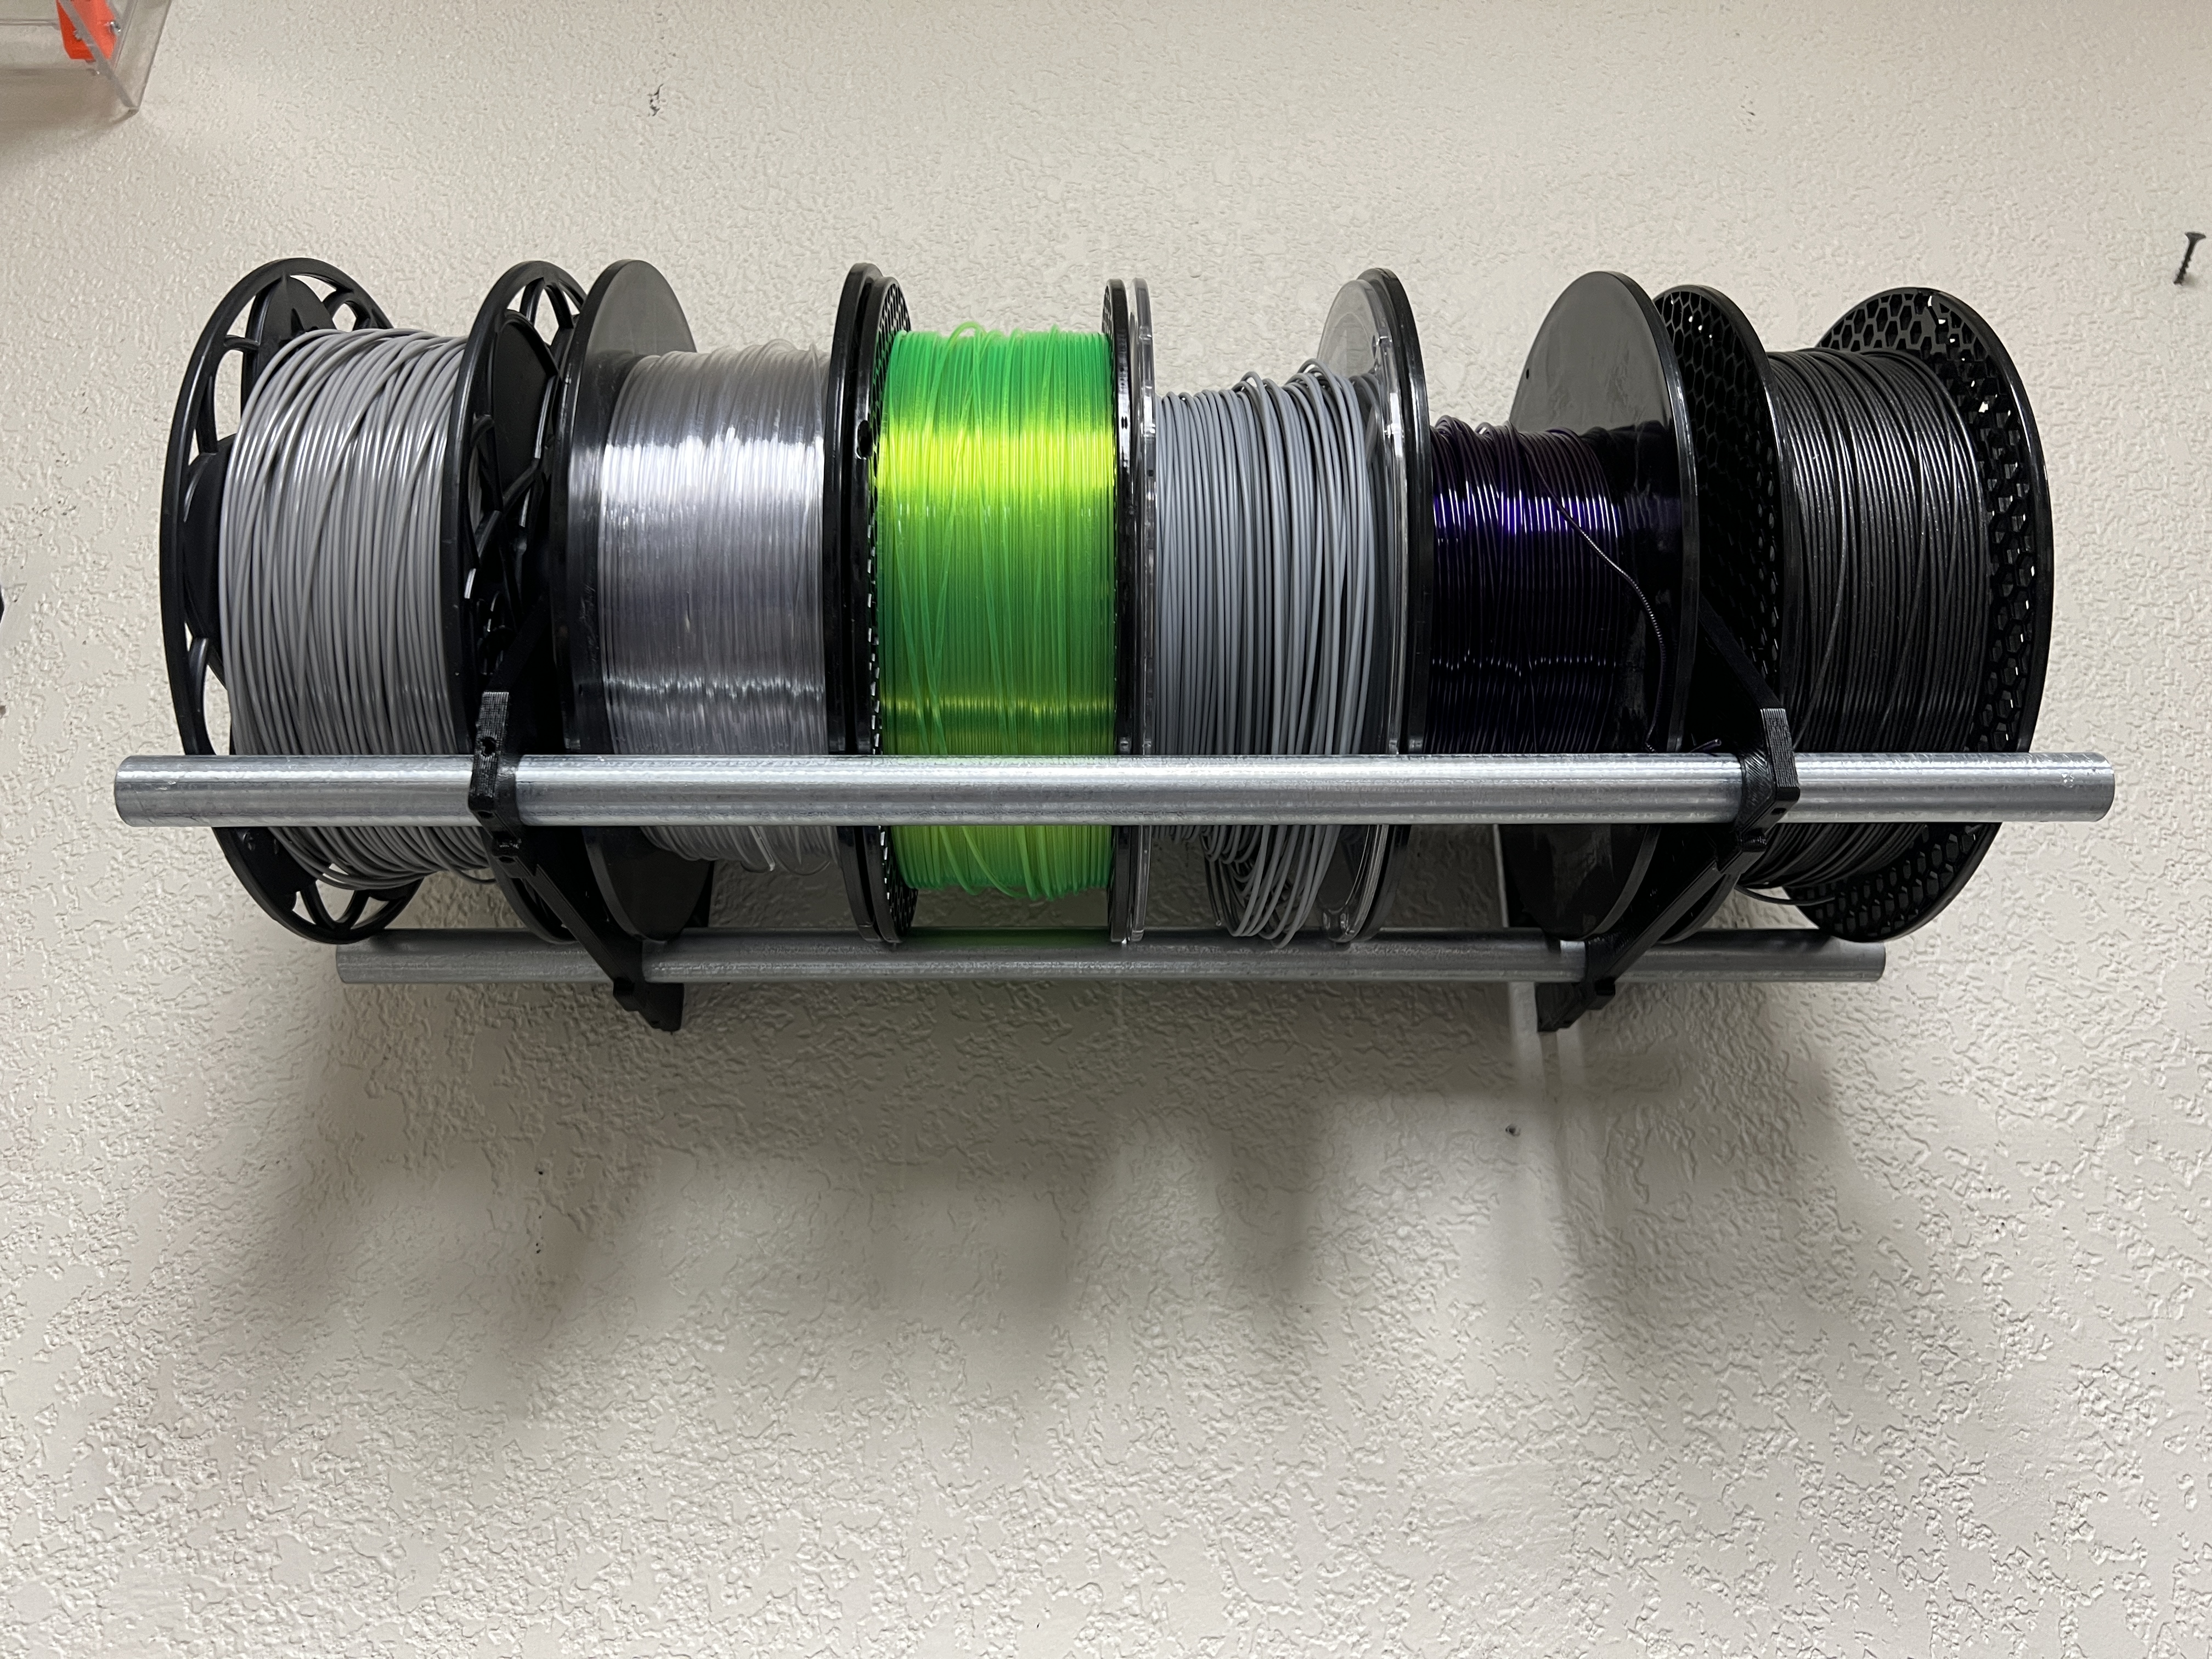 3D Printed Spool Holder by repbaza